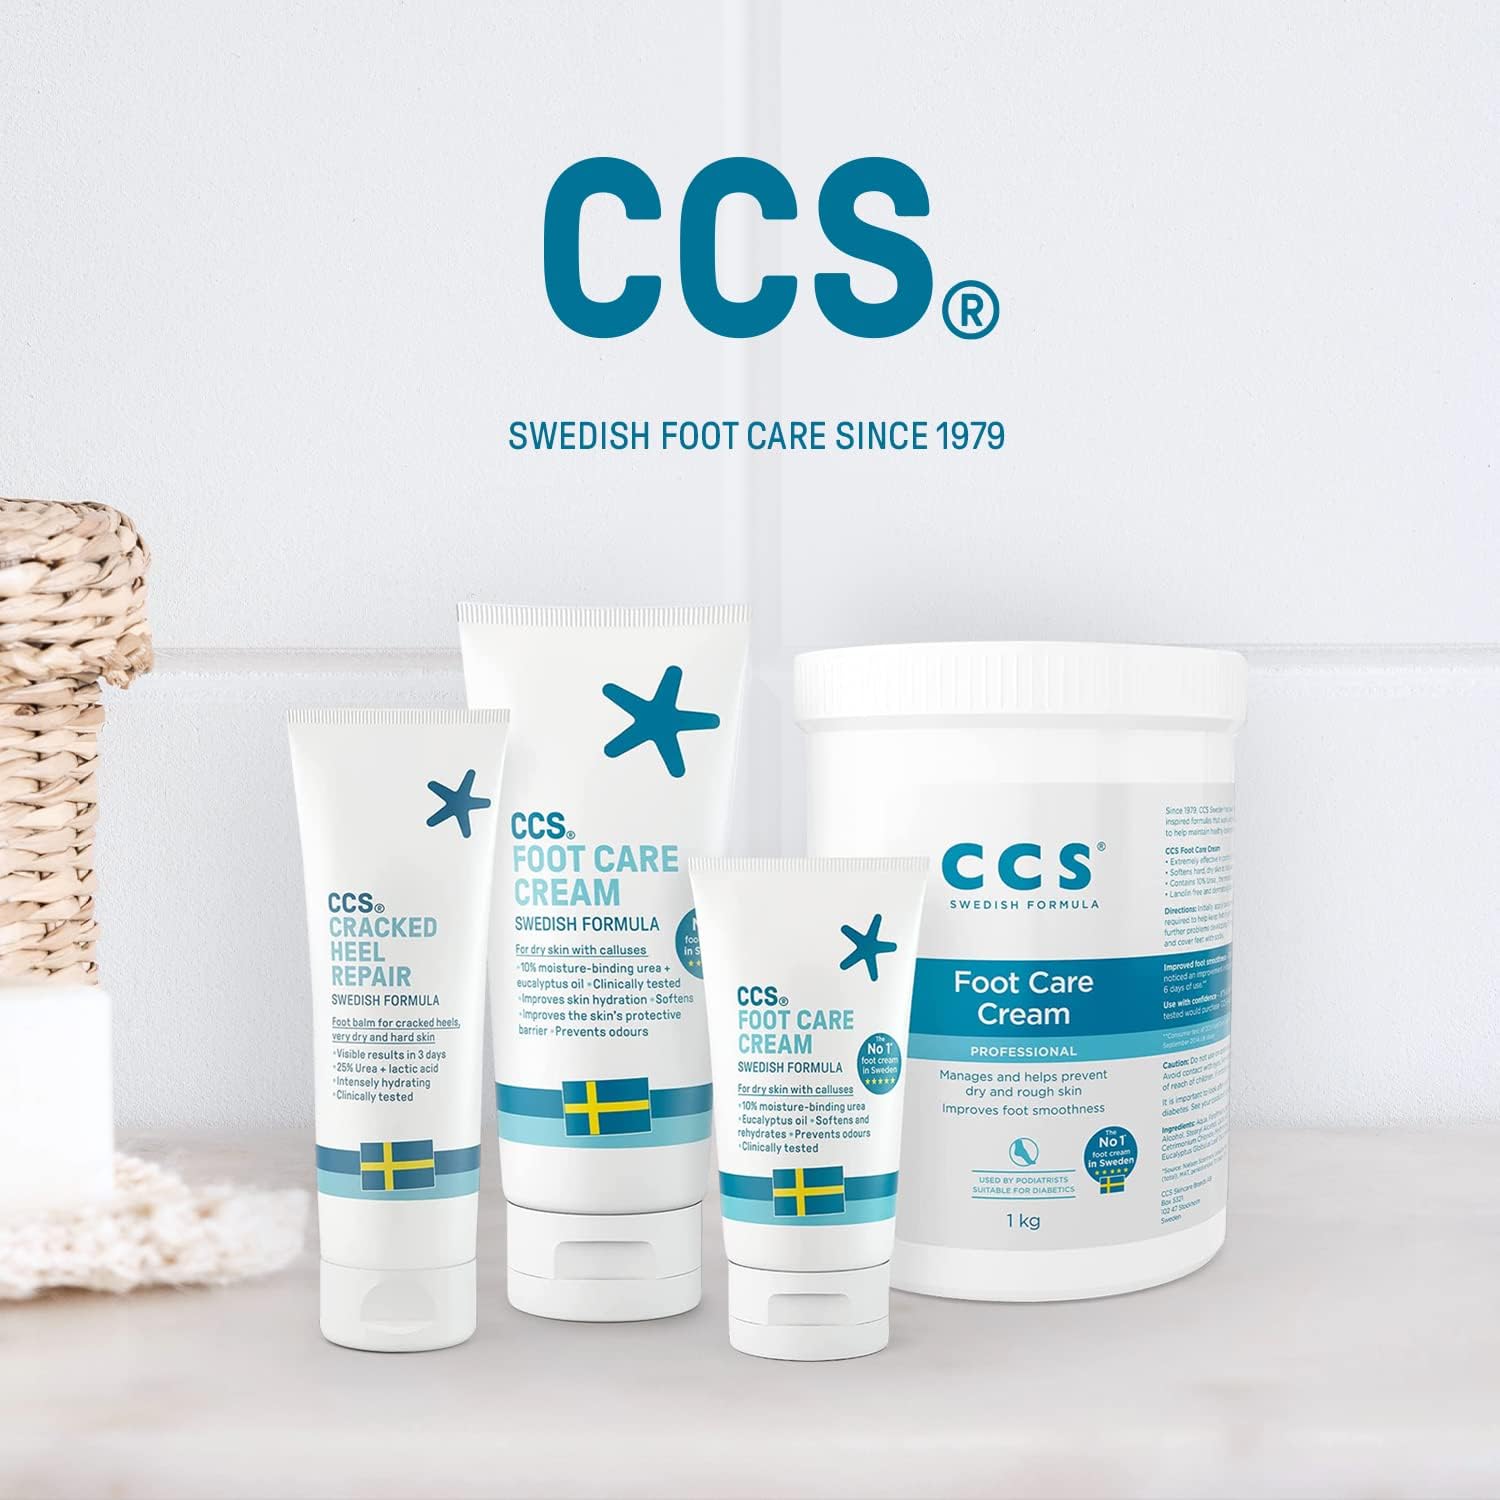 CCS Professional Foot Care Cream 175 ml - Moisturise and Protect Dry and Callused Feet